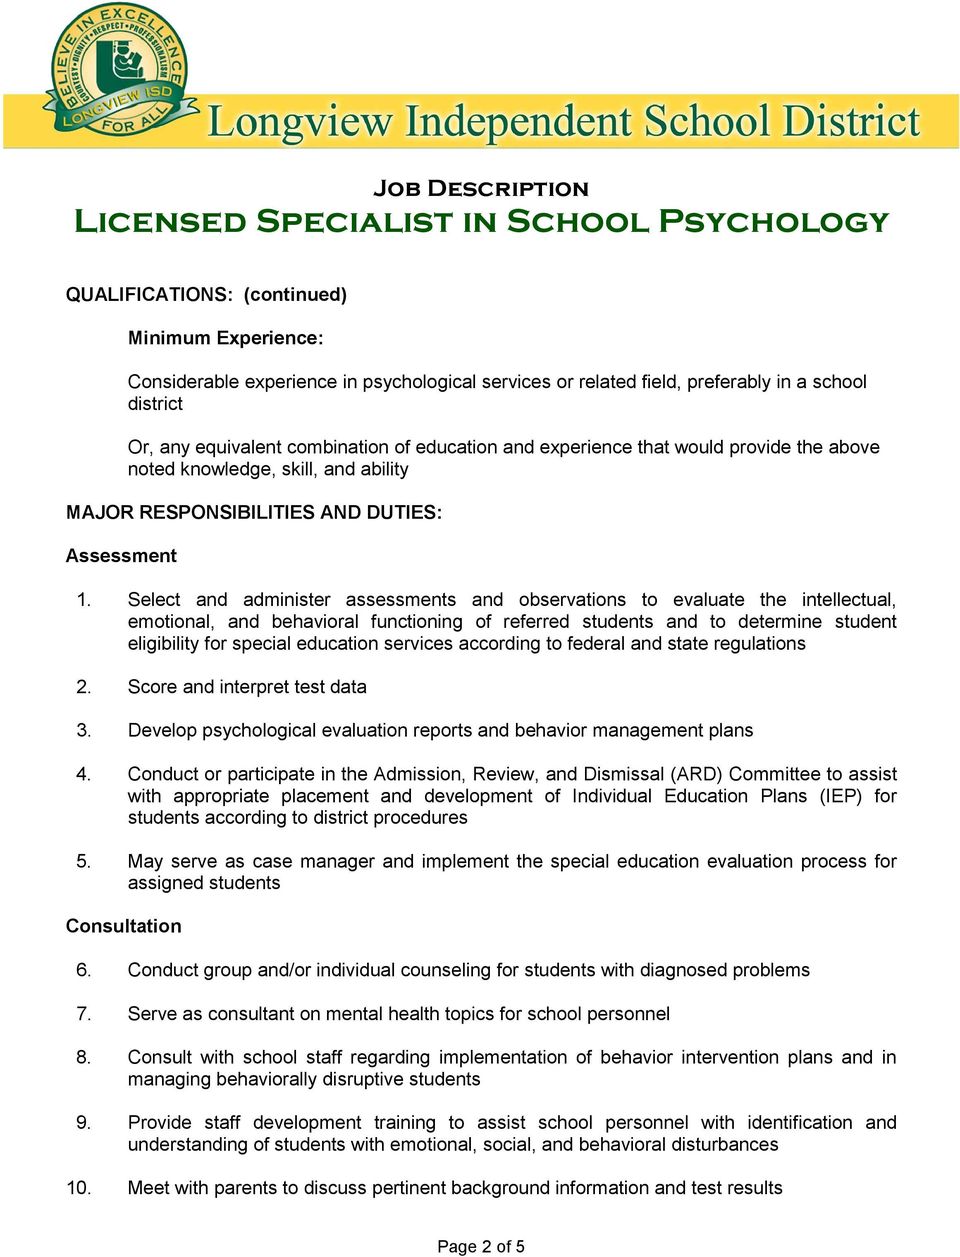 Select and administer assessments and observations to evaluate the intellectual, emotional, and behavioral functioning of referred students and to determine student eligibility for special education